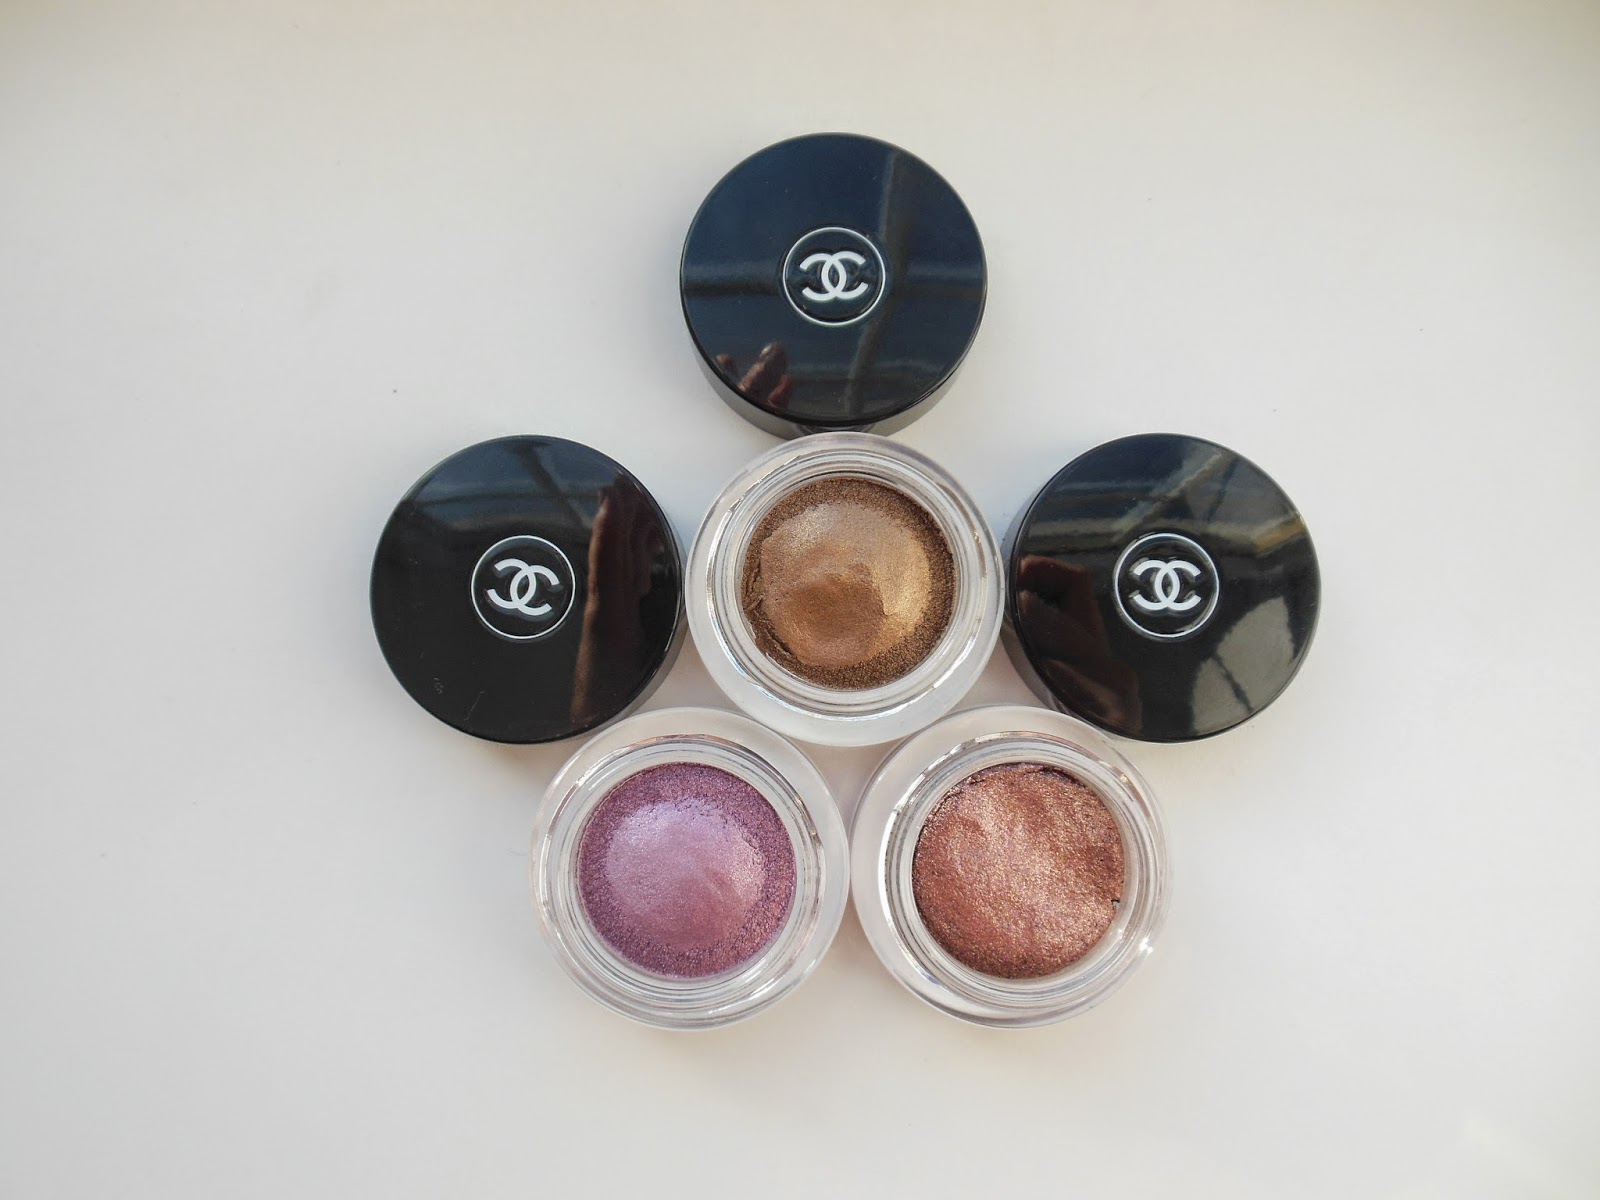 Foresee Trickle dart New In - Chanel Illusion D'Ombre in New Moon, Utopia and Mirage | Coquette  Noelle